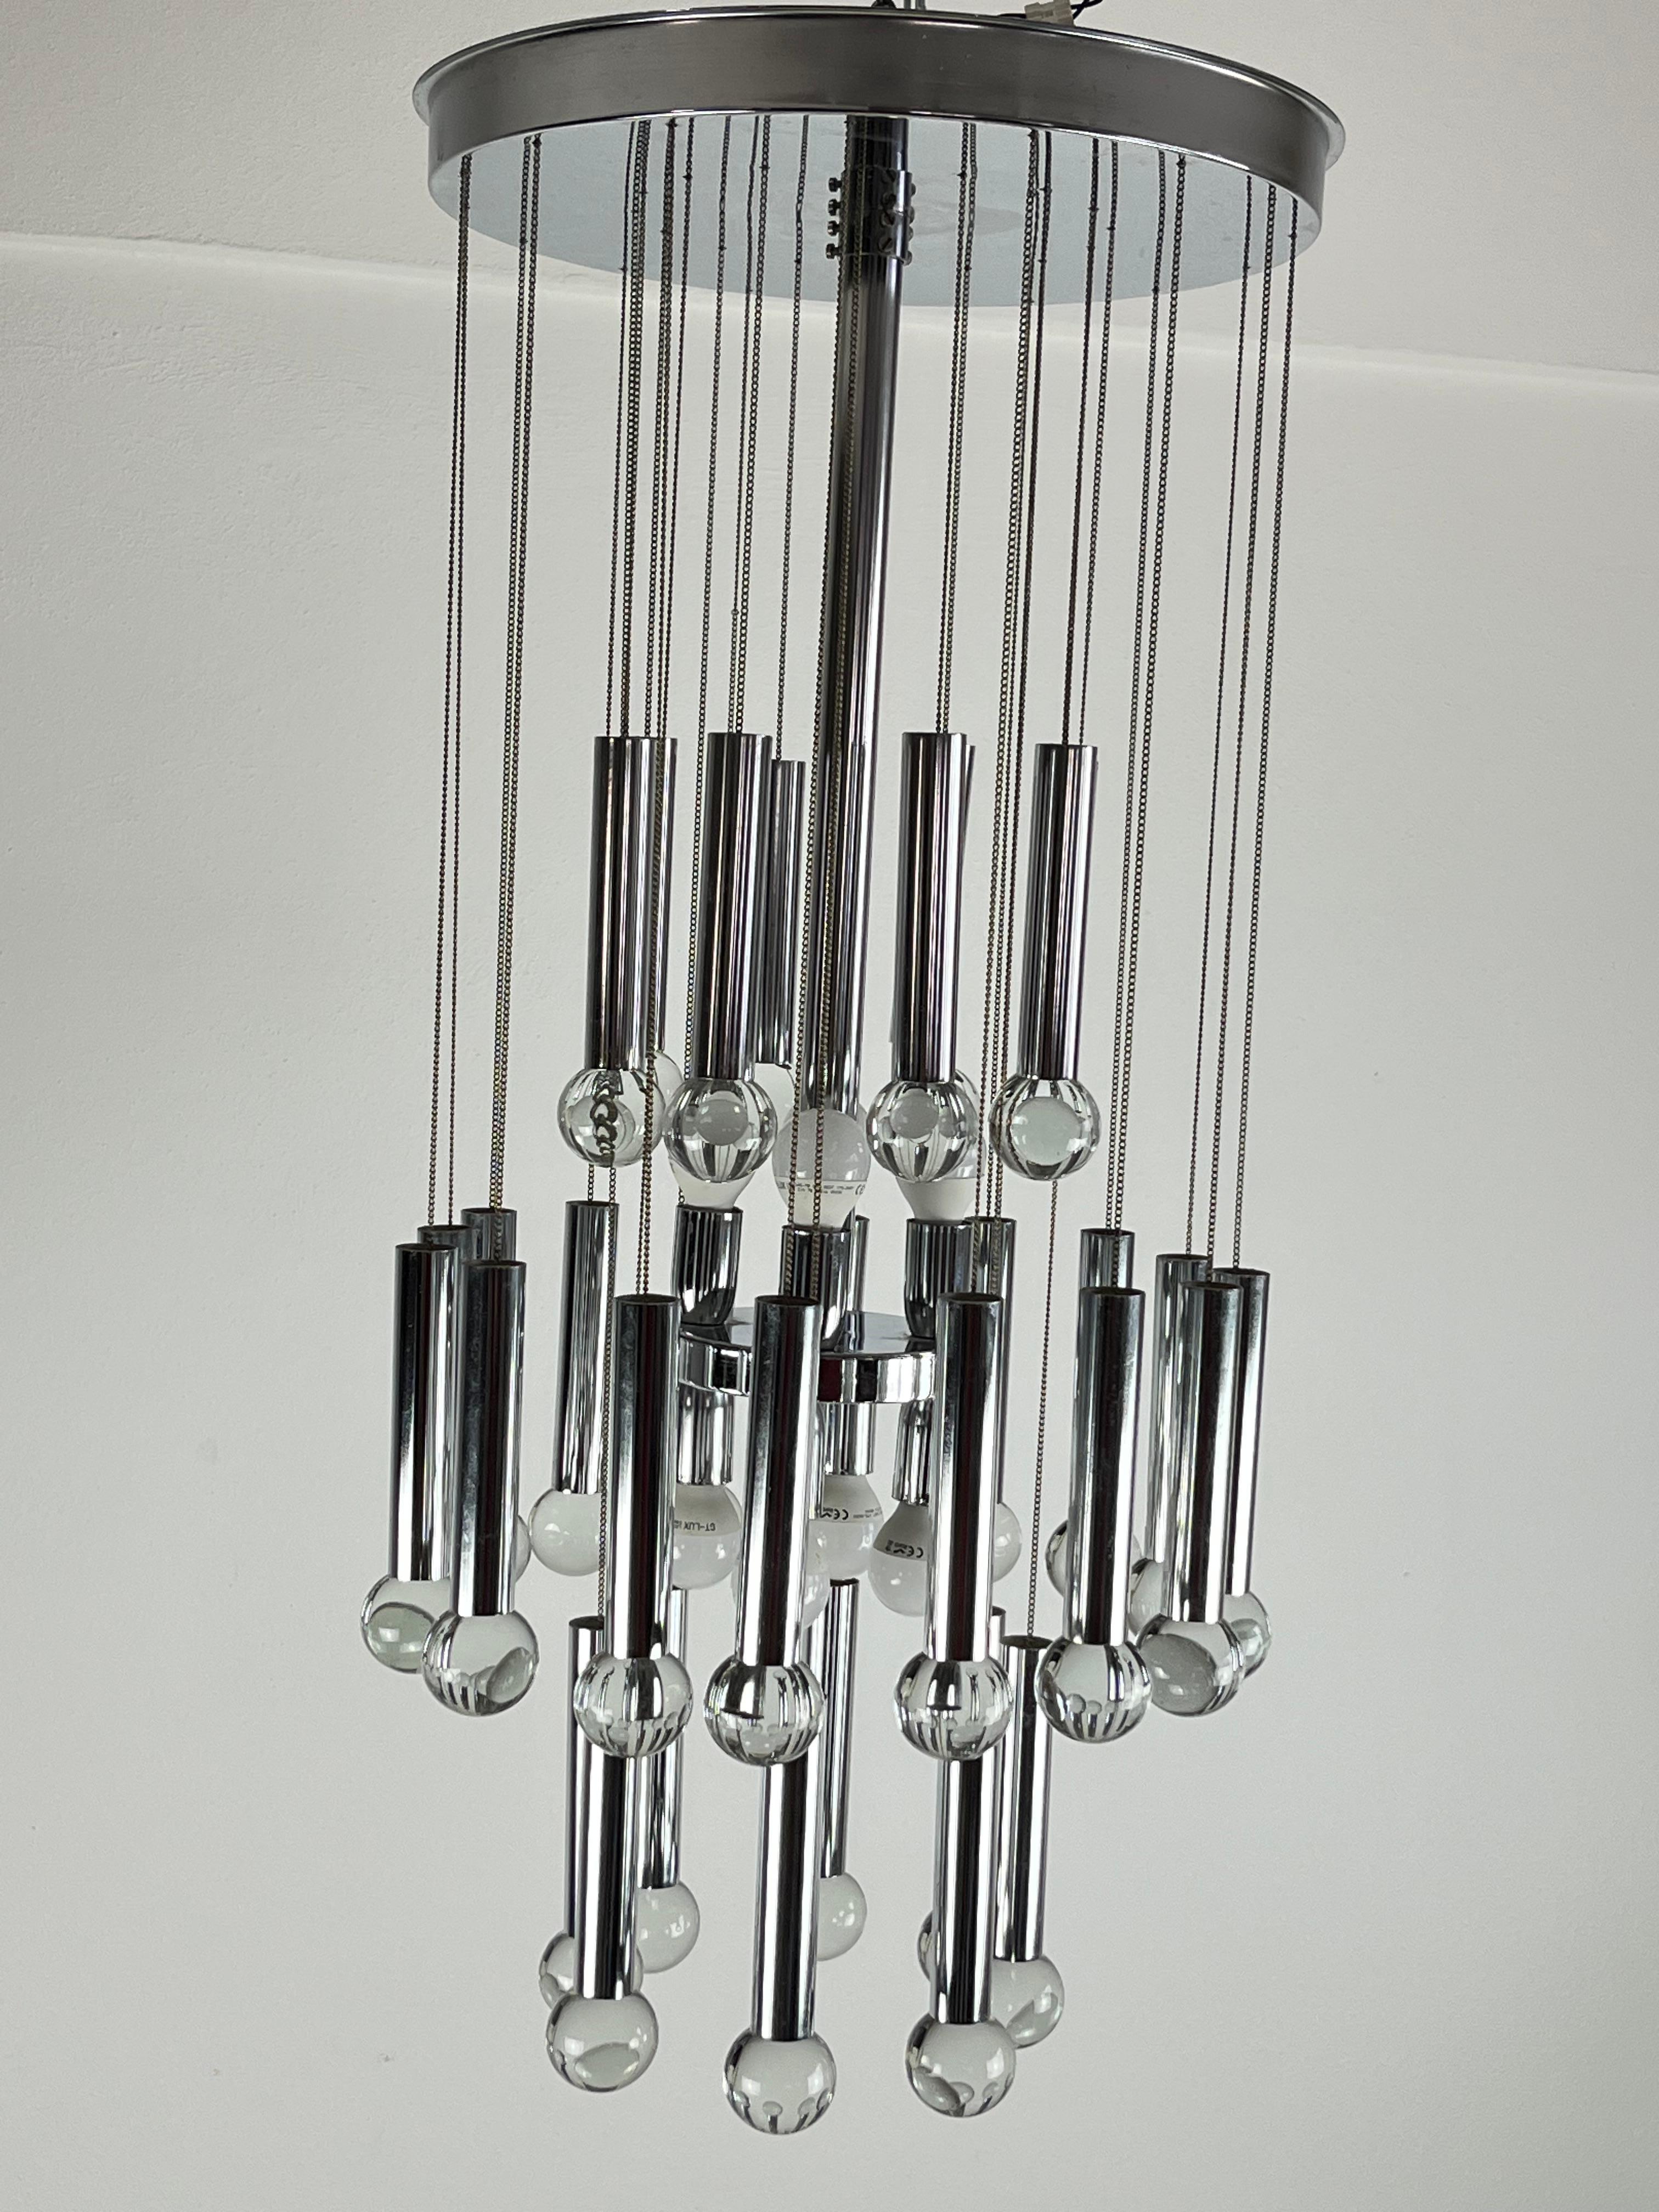 Italian Eight-Light Steel and Glass Chandelier by Gaetano Sciolari, Italy, 1970s For Sale